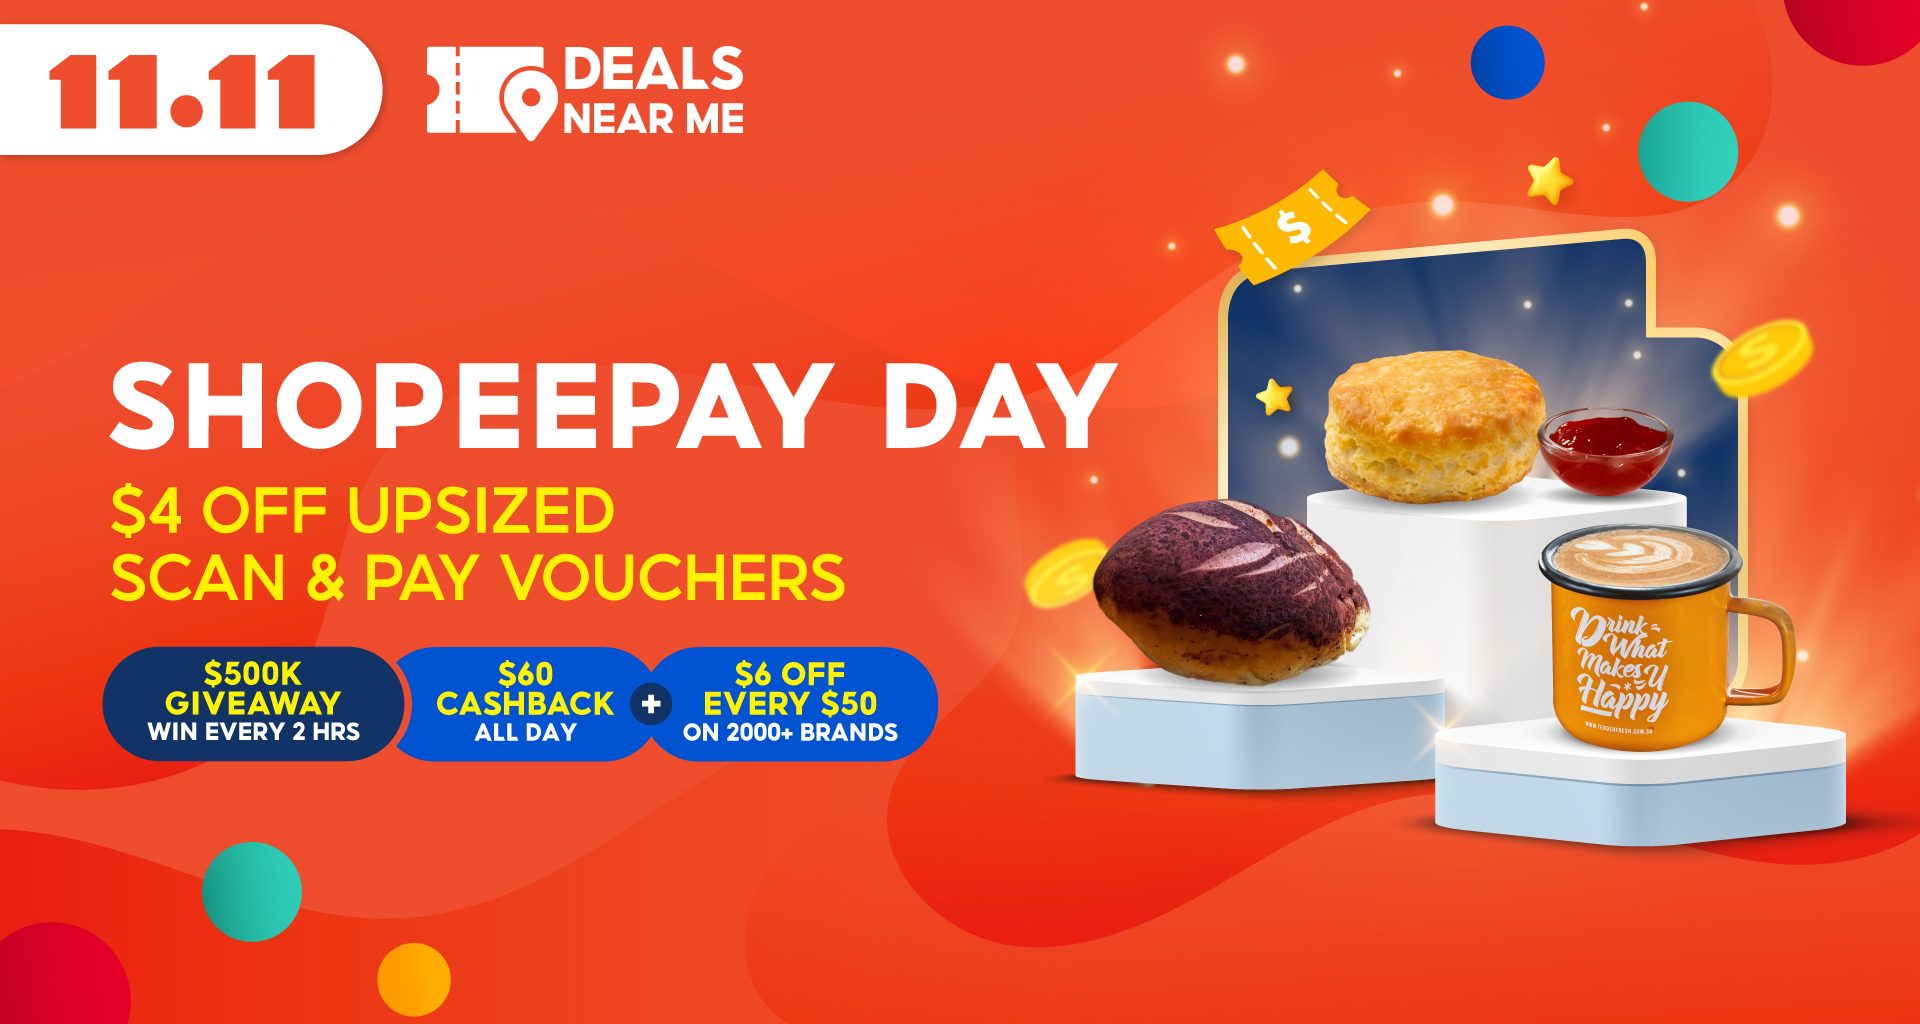 ShopeePay users will be rewarded handsomely this ShopeePay Day, with a chance to win upsized prizes worth up to $1,000 and 20% cashback flash vouchers - Alvinology